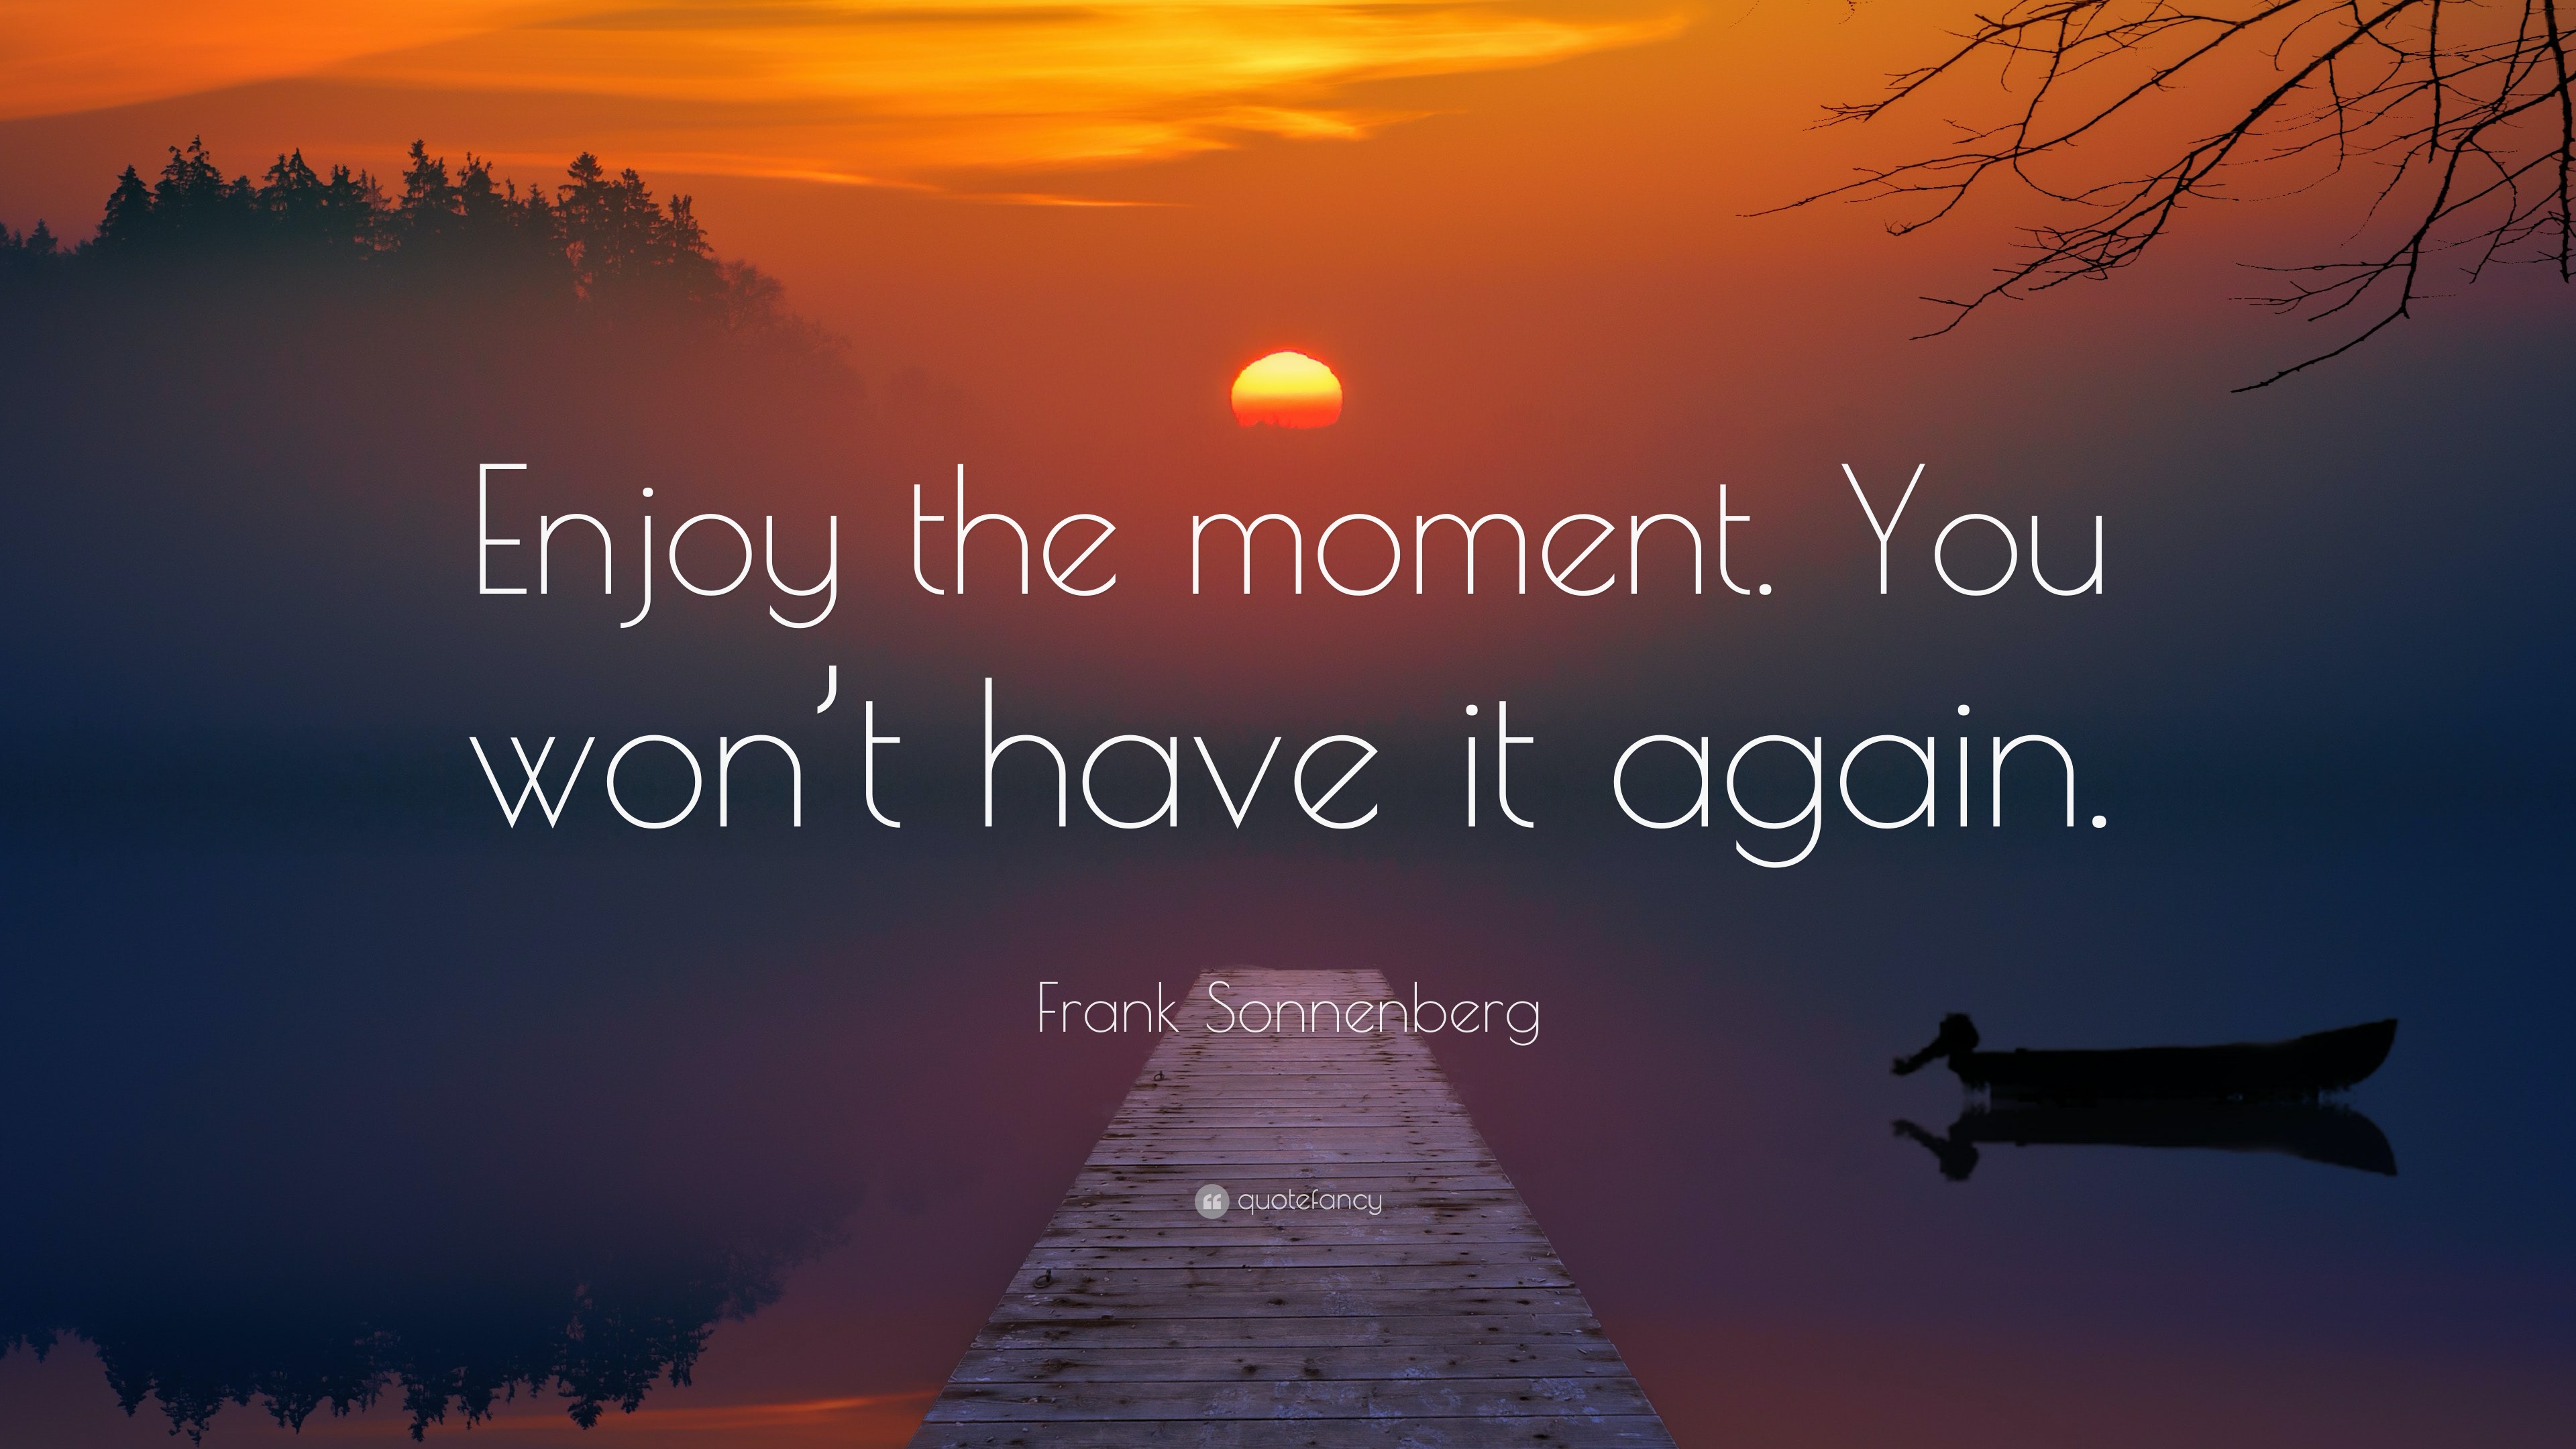 Frank Sonnenberg Quote: “Enjoy the moment. You won't have it again